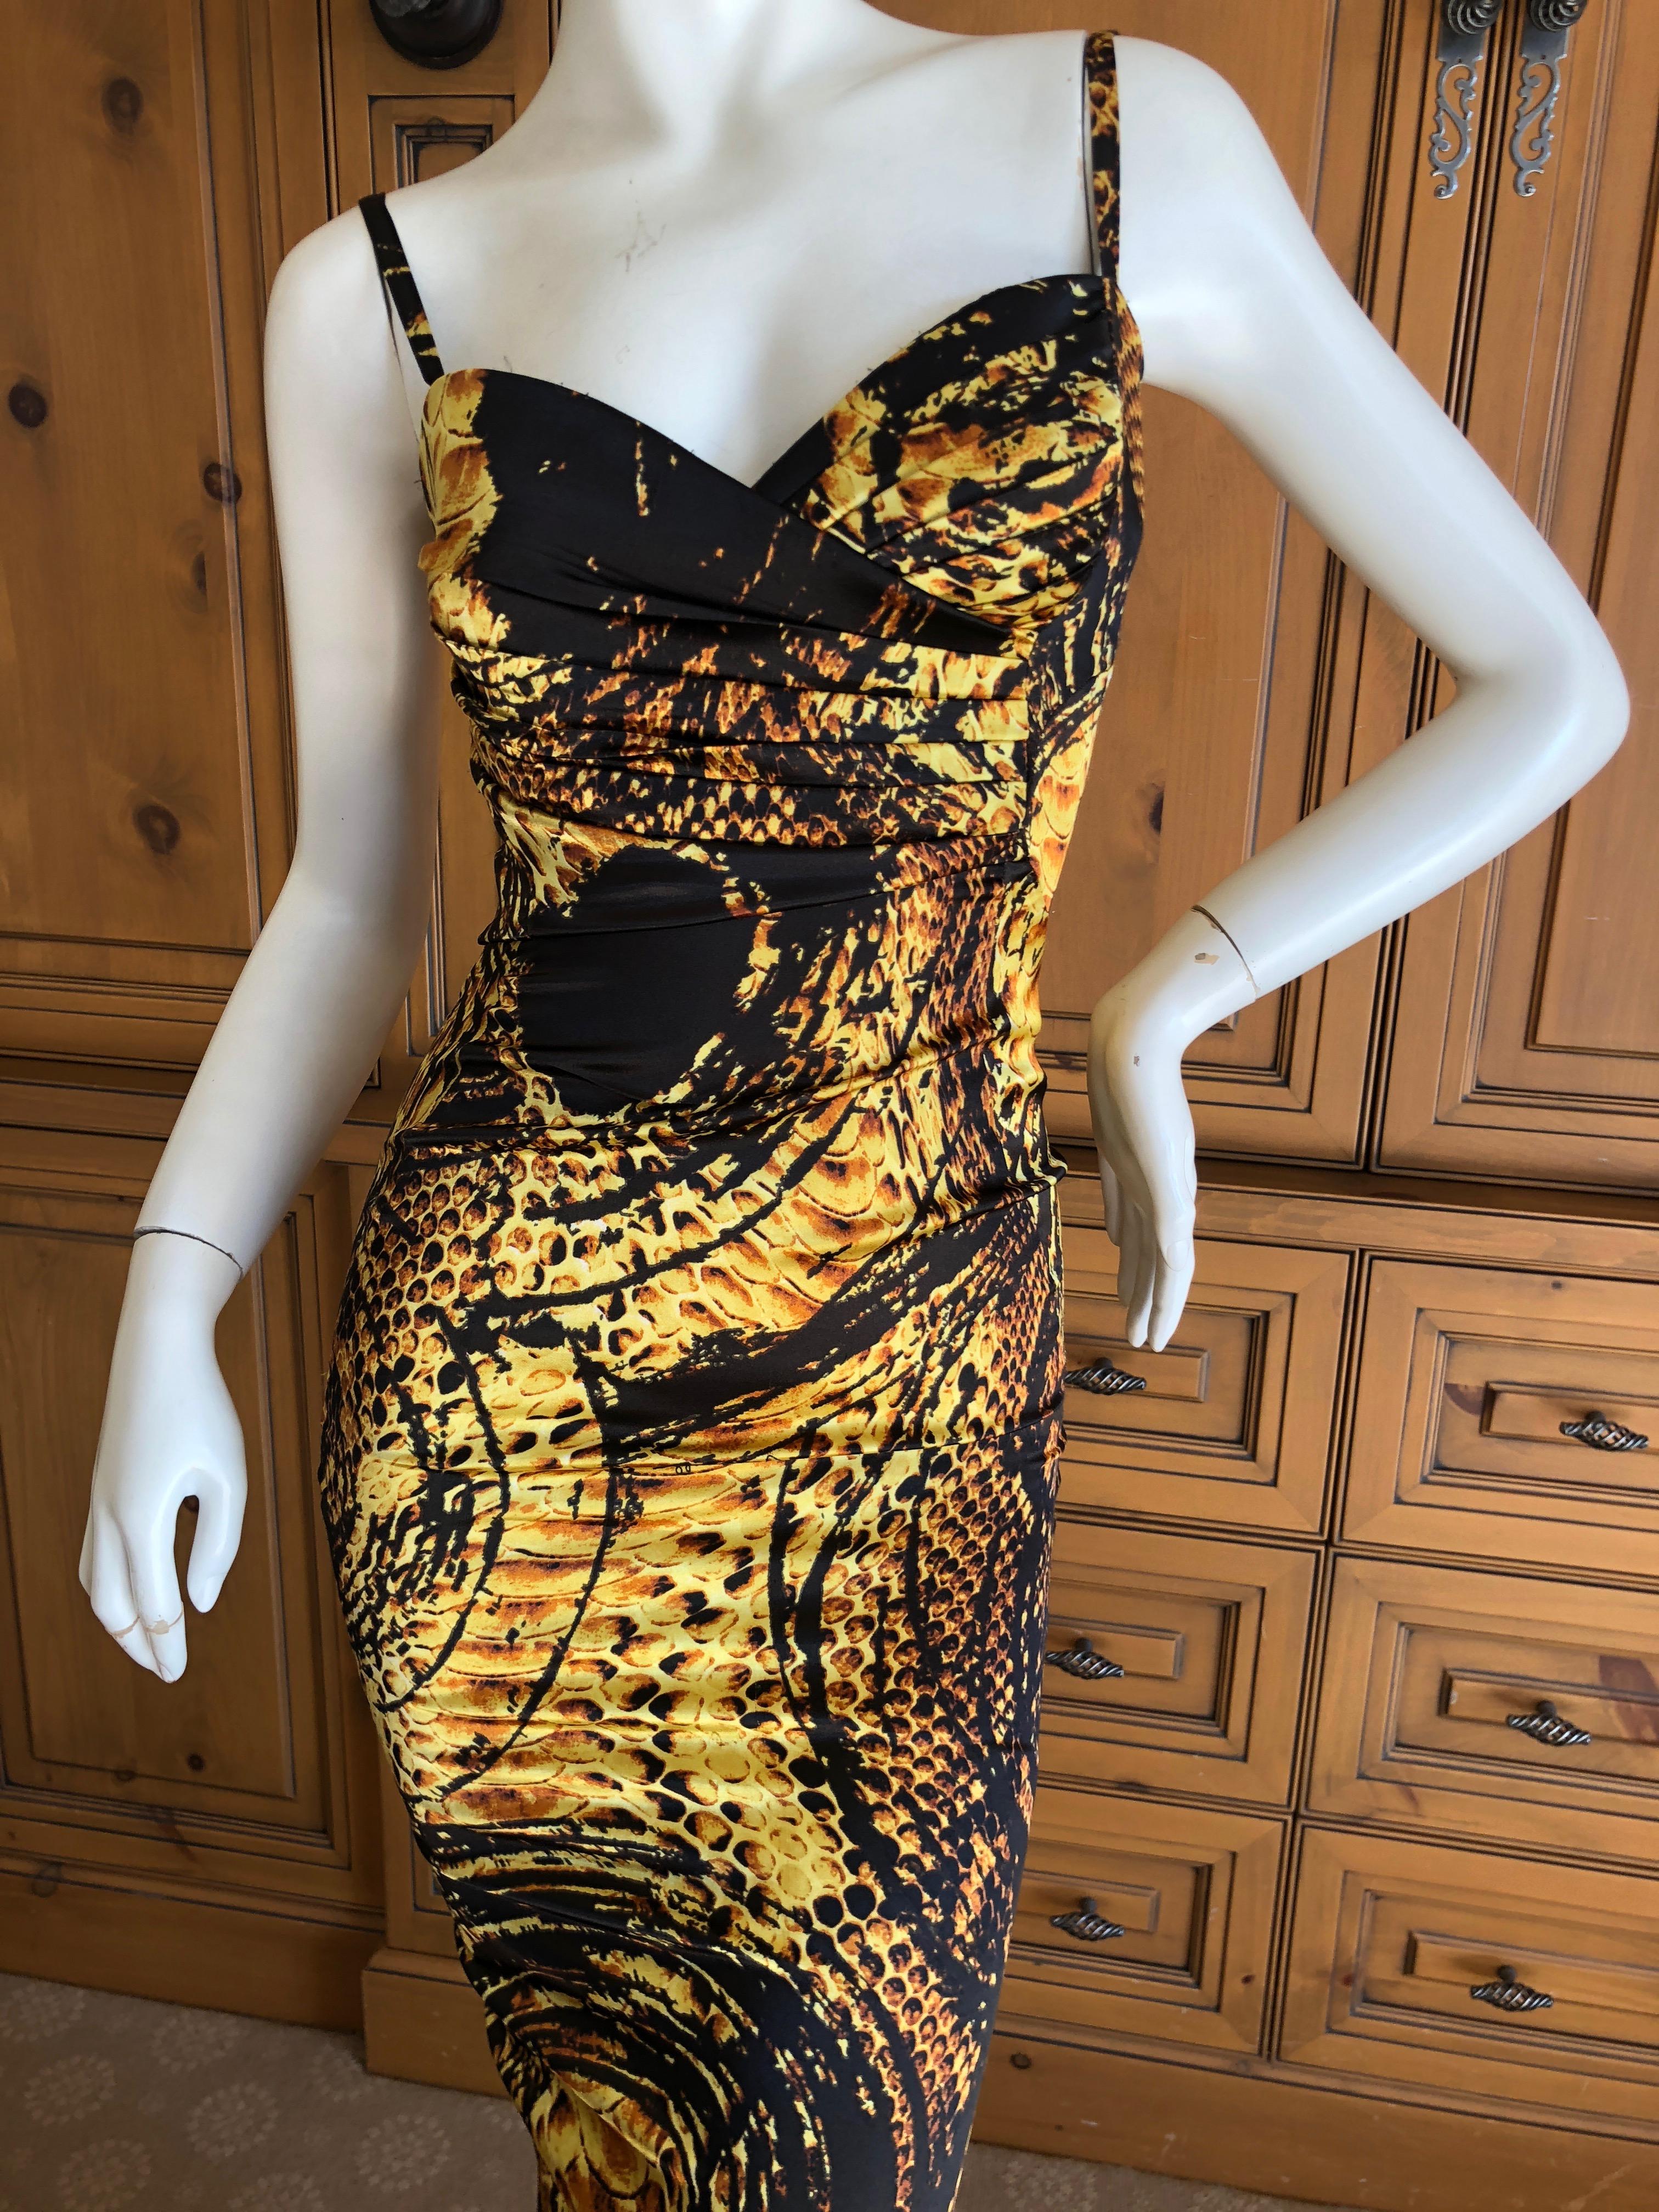 Roberto Cavalli Reptile Print Evening Dress for Just Cavalli In Excellent Condition For Sale In Cloverdale, CA